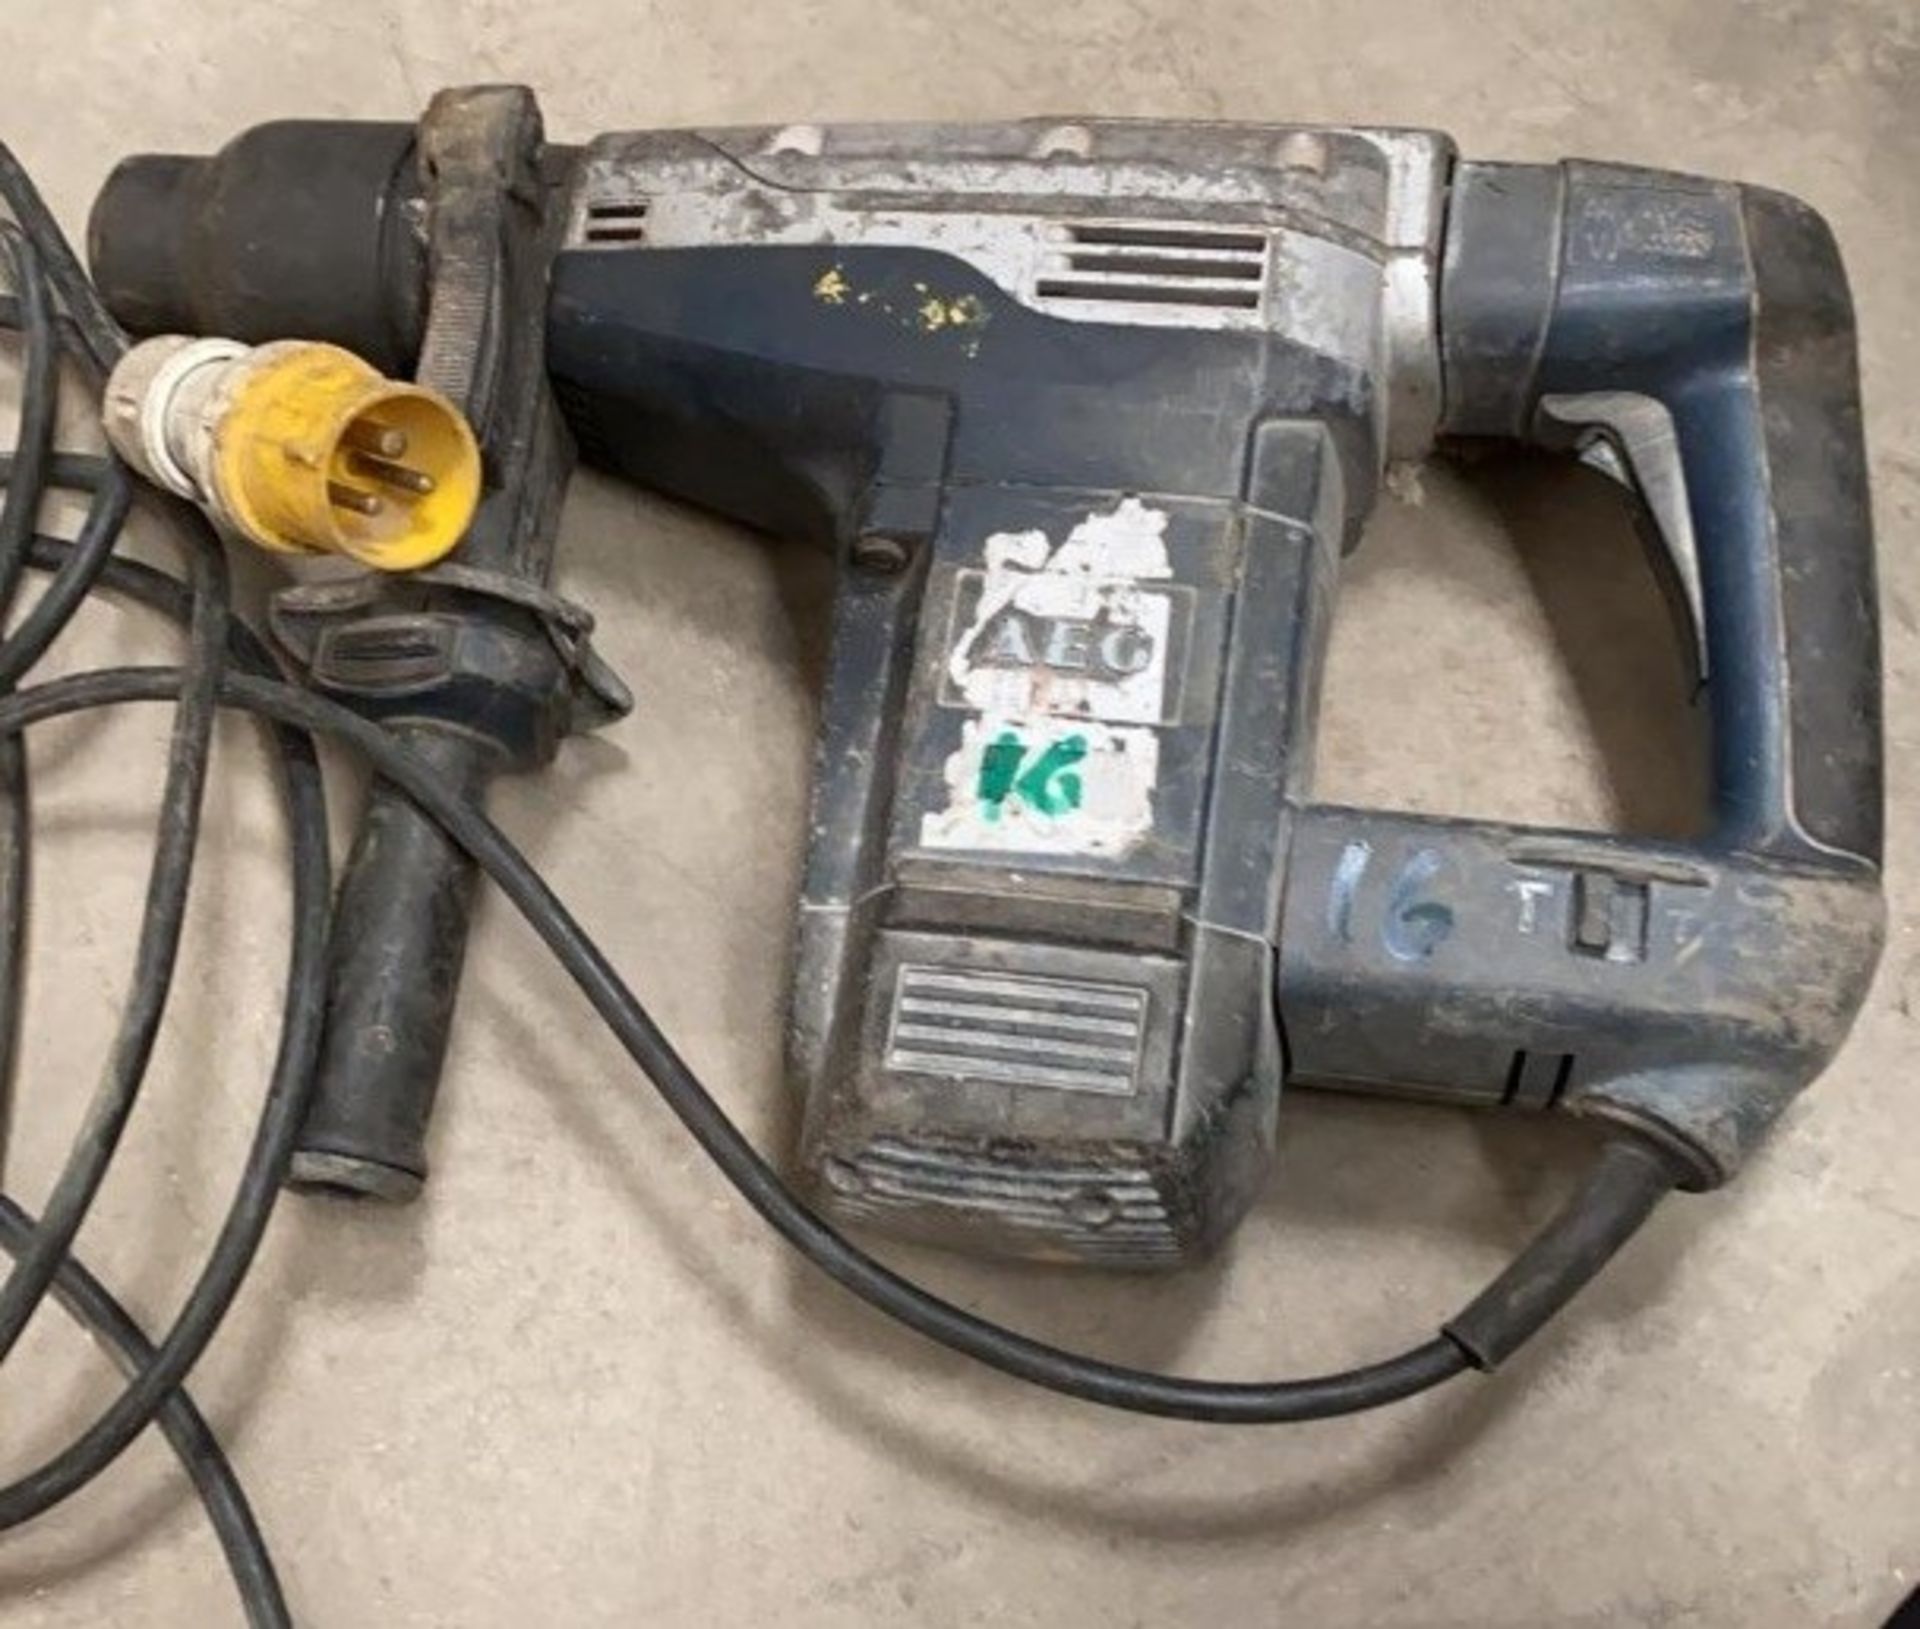 1 x AEG High Impact Drill - Used, Recently Removed From A Working Site - CL505 - Ref: TL016 - - Image 2 of 2